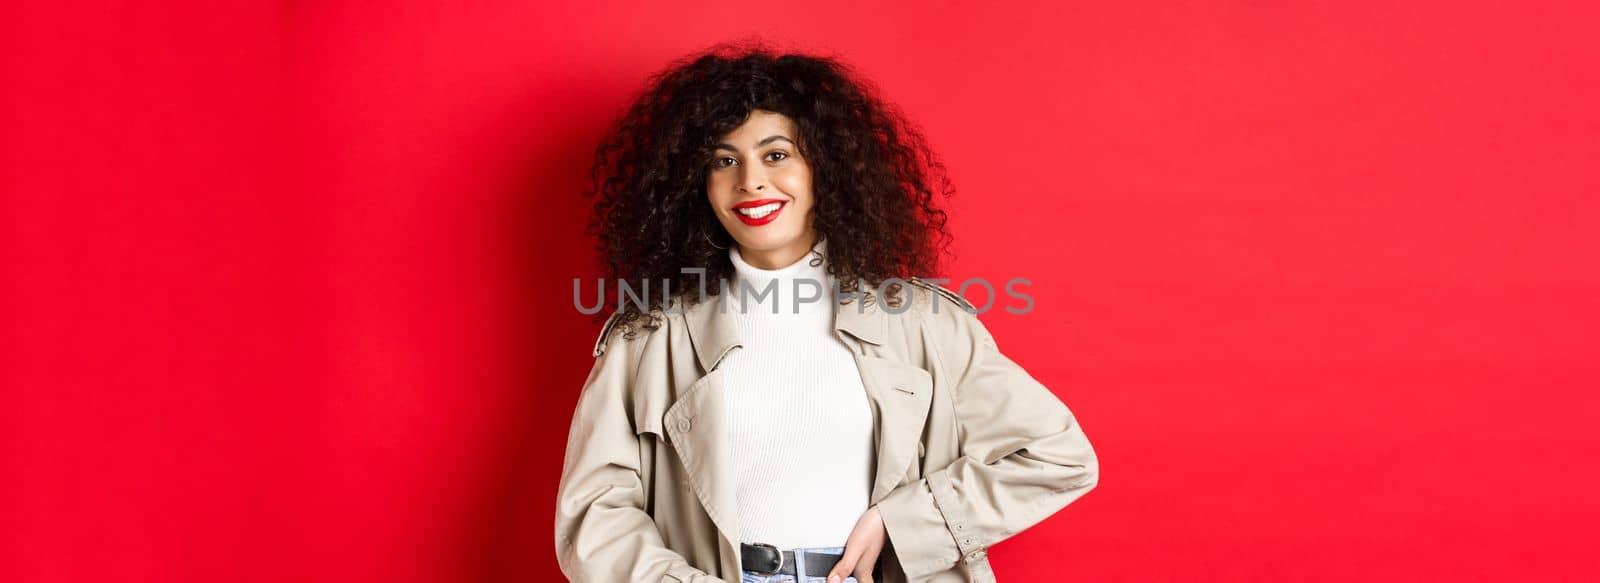 Modern woman with curly hair, wearing outdoor clothes, going for walk, standing against red background.